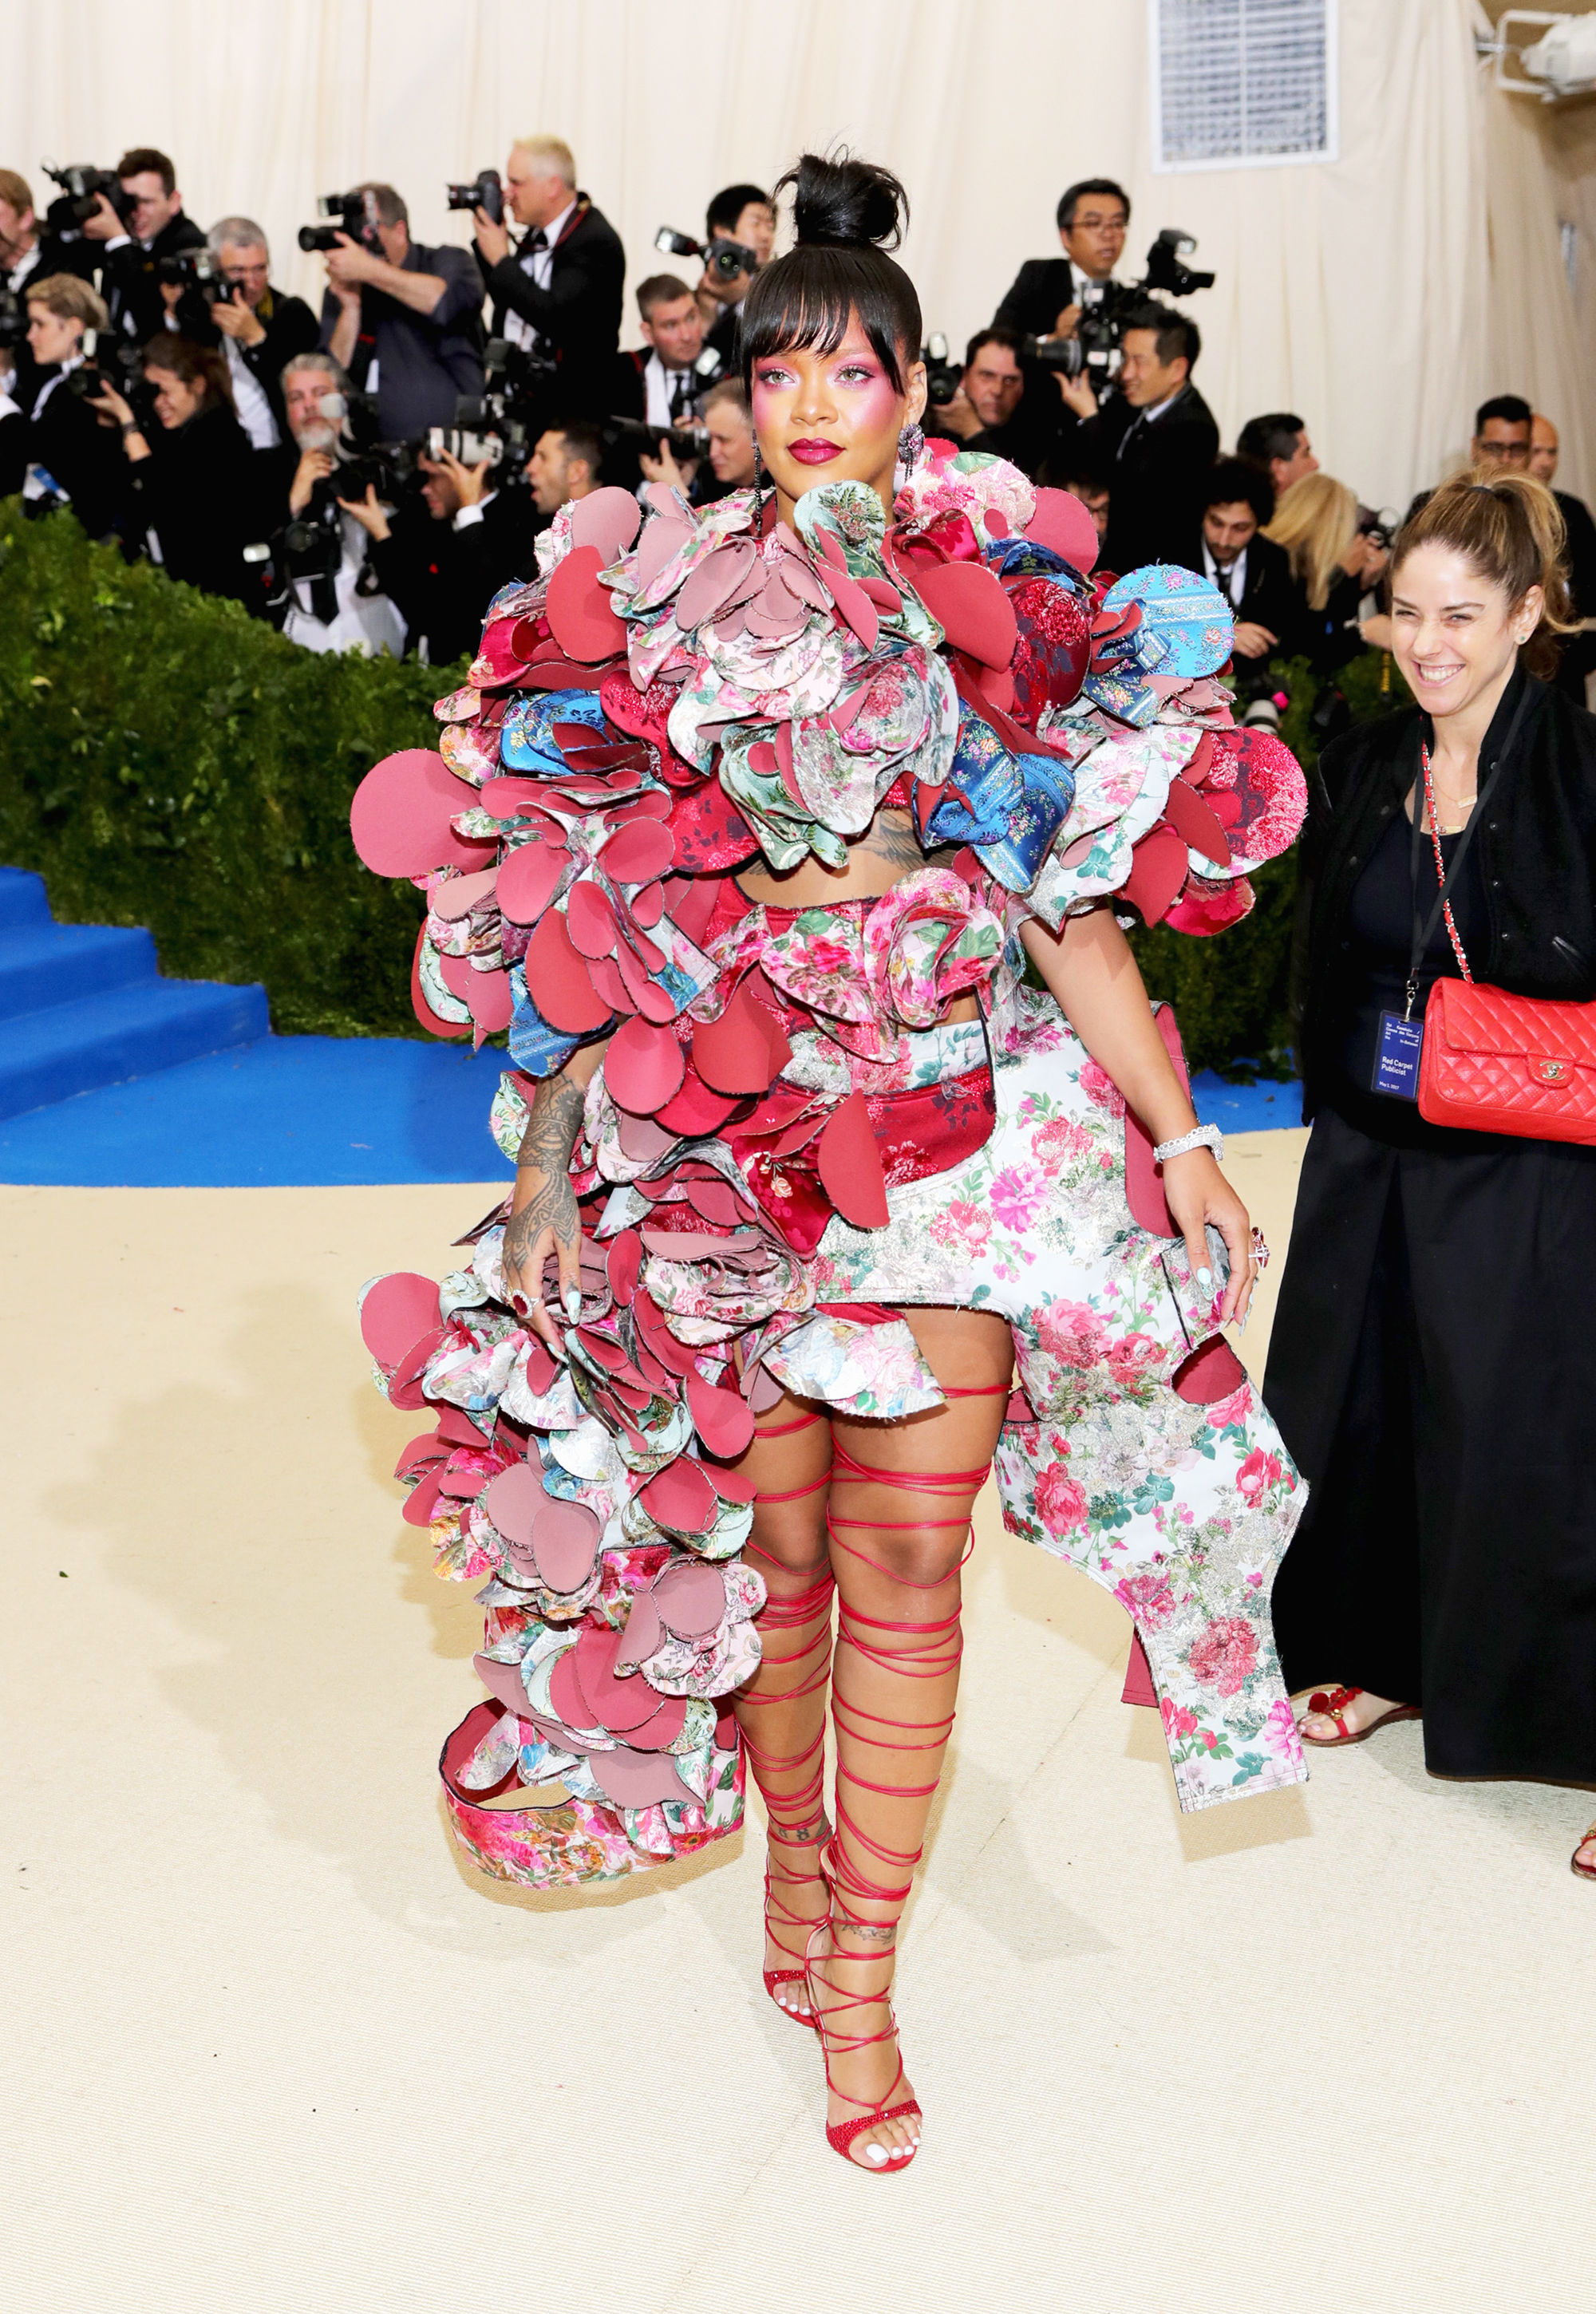 Rihanna attends The Metropolitan Museum of Art's Costume Institute benefit gala celebrating the opening of the Rei Kawakubo/Comme des Garçons: Art of the In-Between exhibition in New York City, on May 1, 2017.